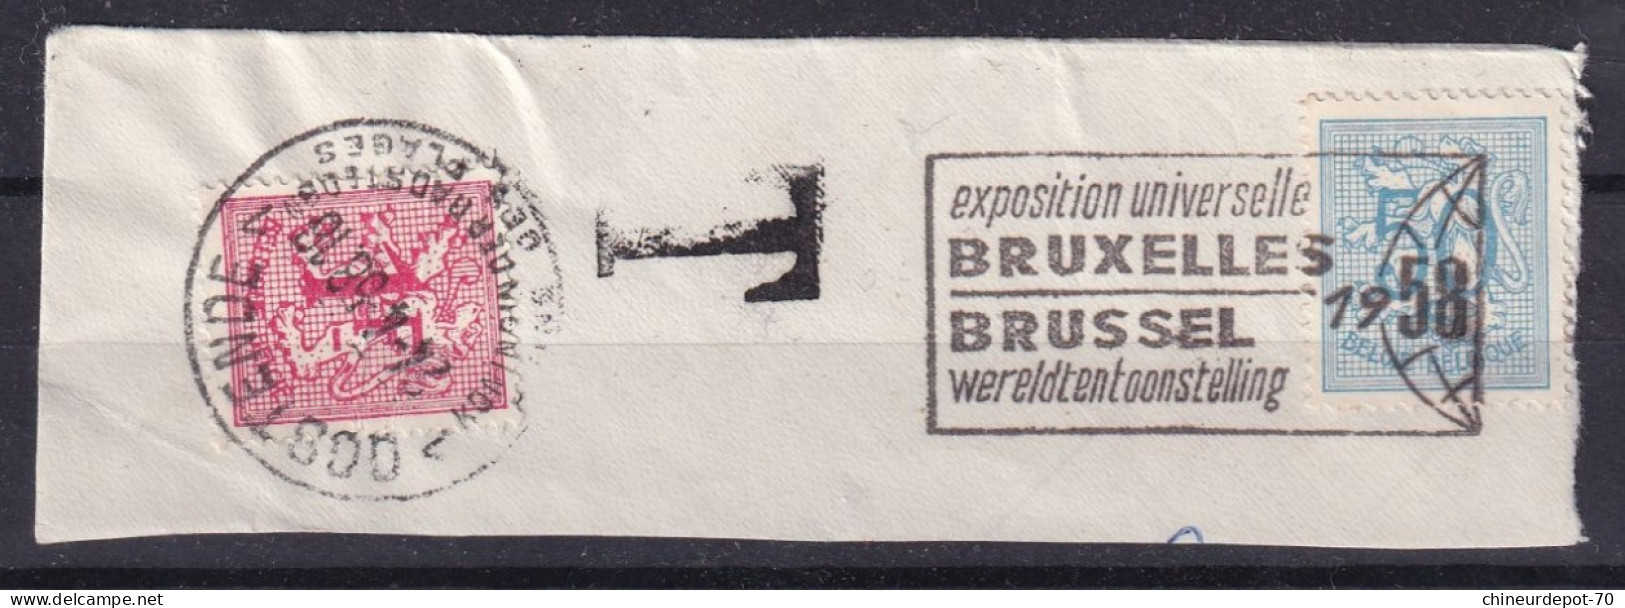 TIMBRES T Taxes CHIFFRES OOSTENDE BRUXELLES EXPOSITION 1958 - Francobolli